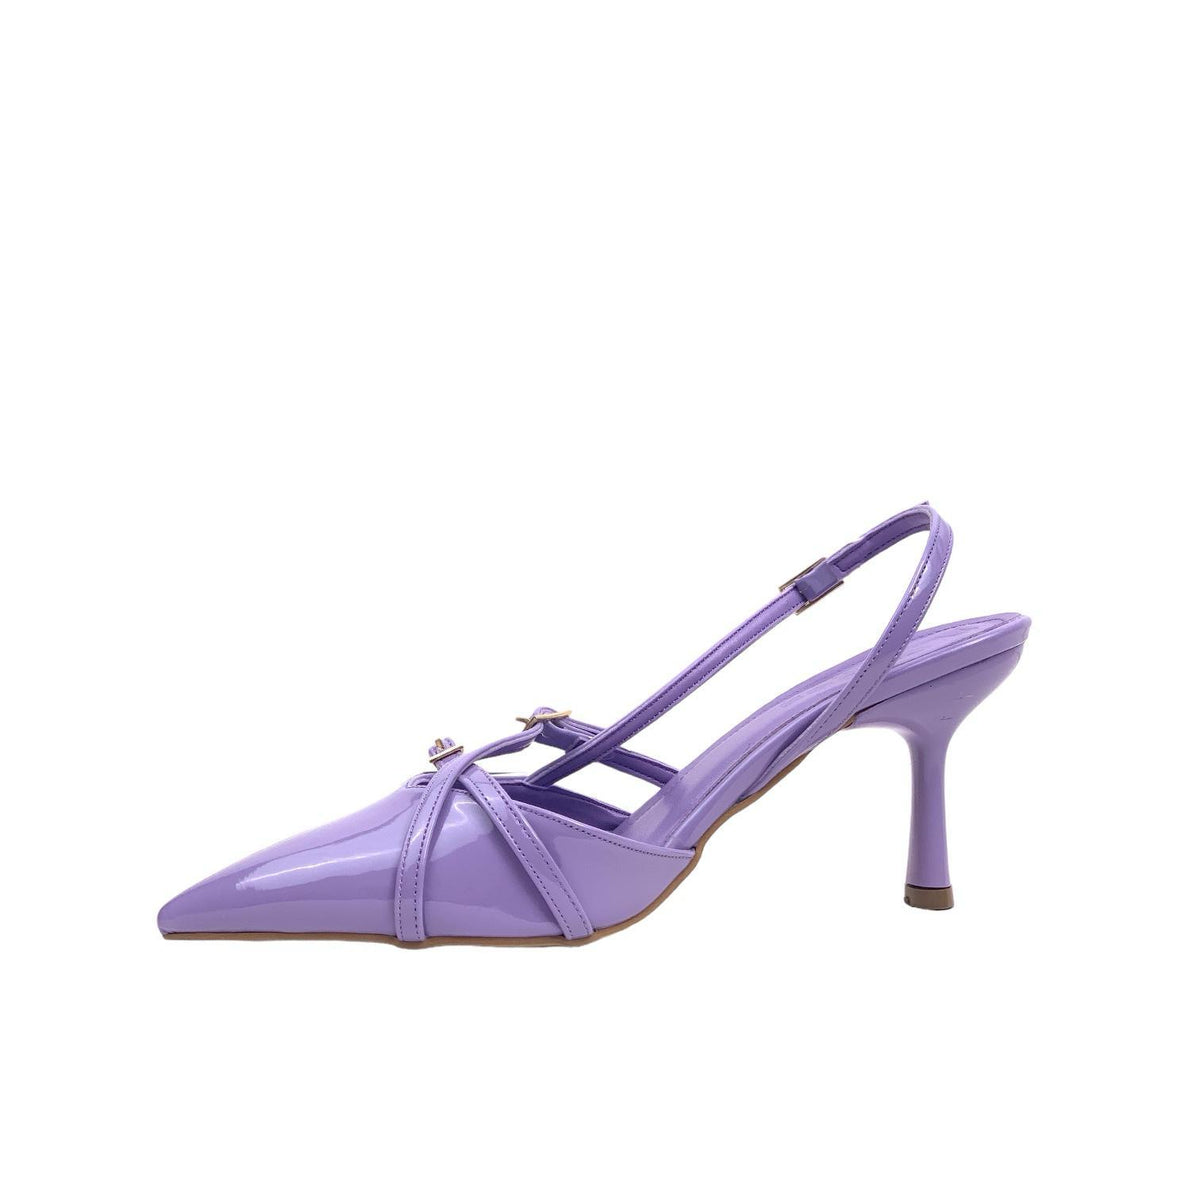 Women's Ferga Lilac Double Buckle Heeled Shoes Sandals 7 Cm - STREETMODE™